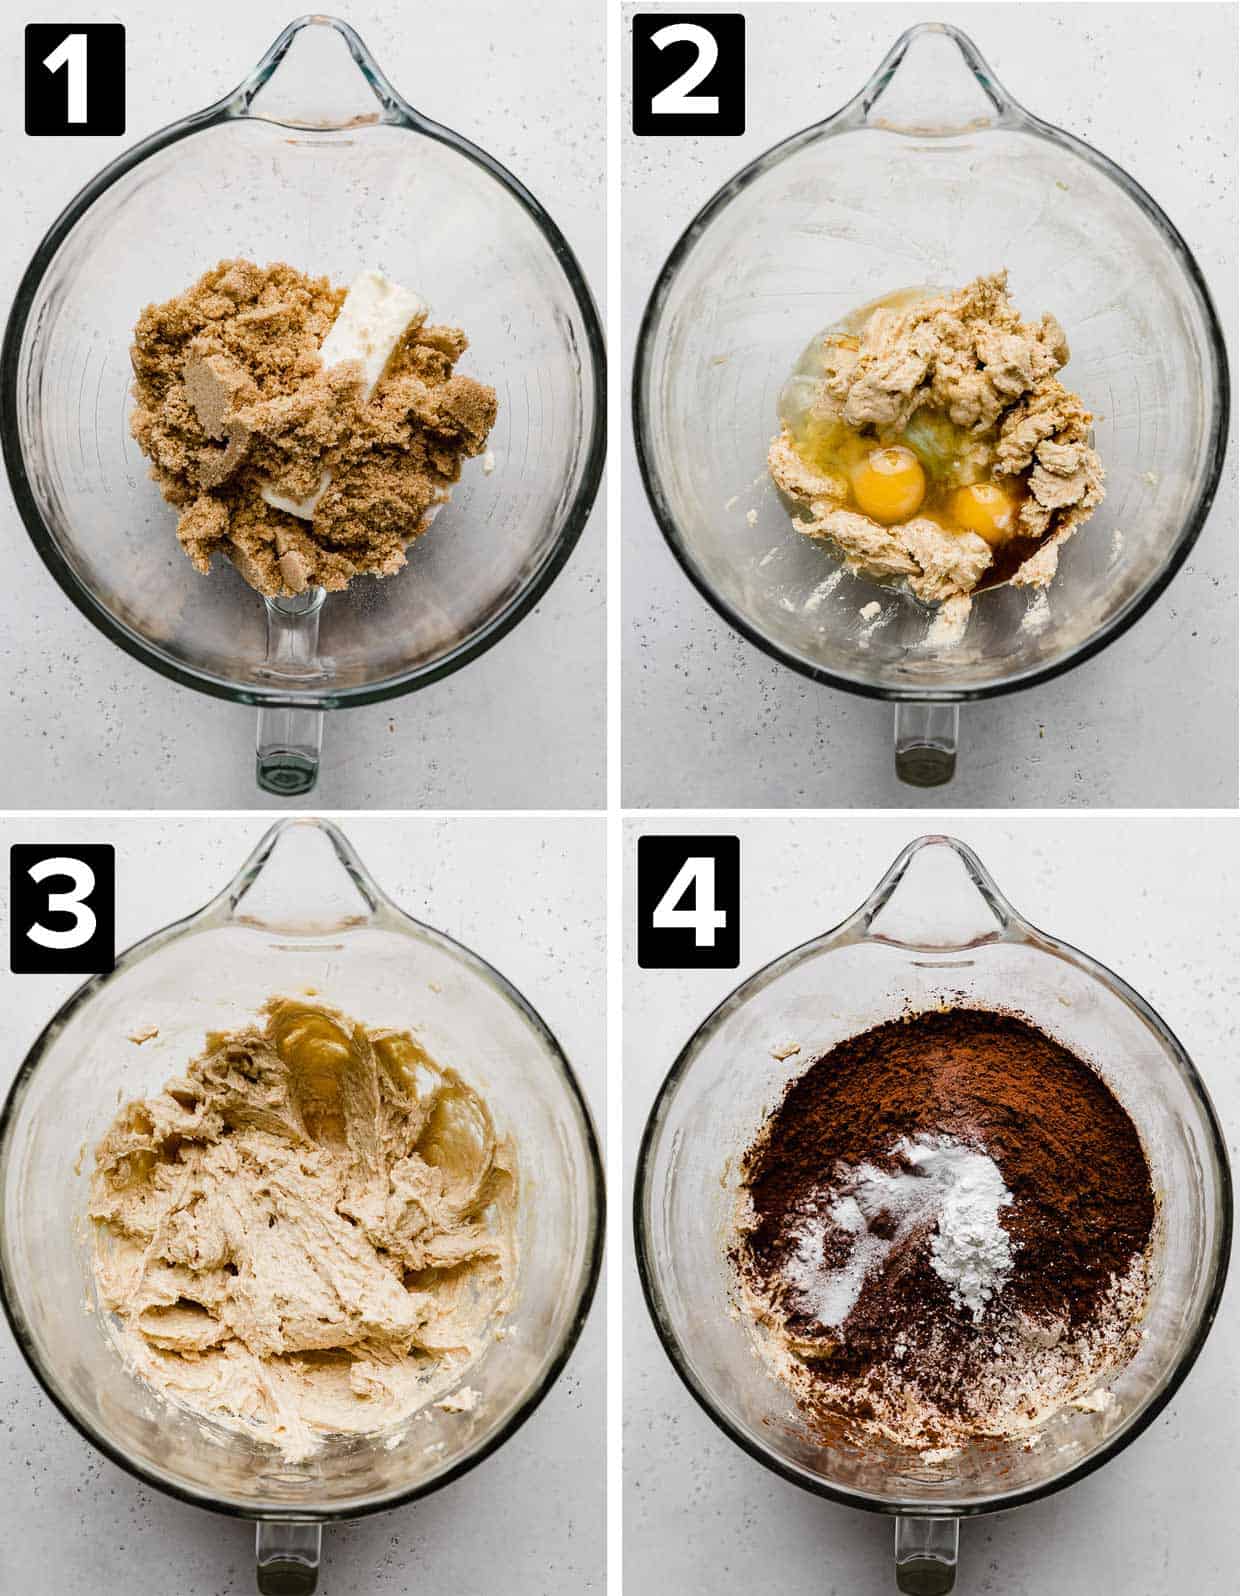 Four photos showing the making of Chocolate Andes Mint Cookie dough in a glass bowl on a gray background.